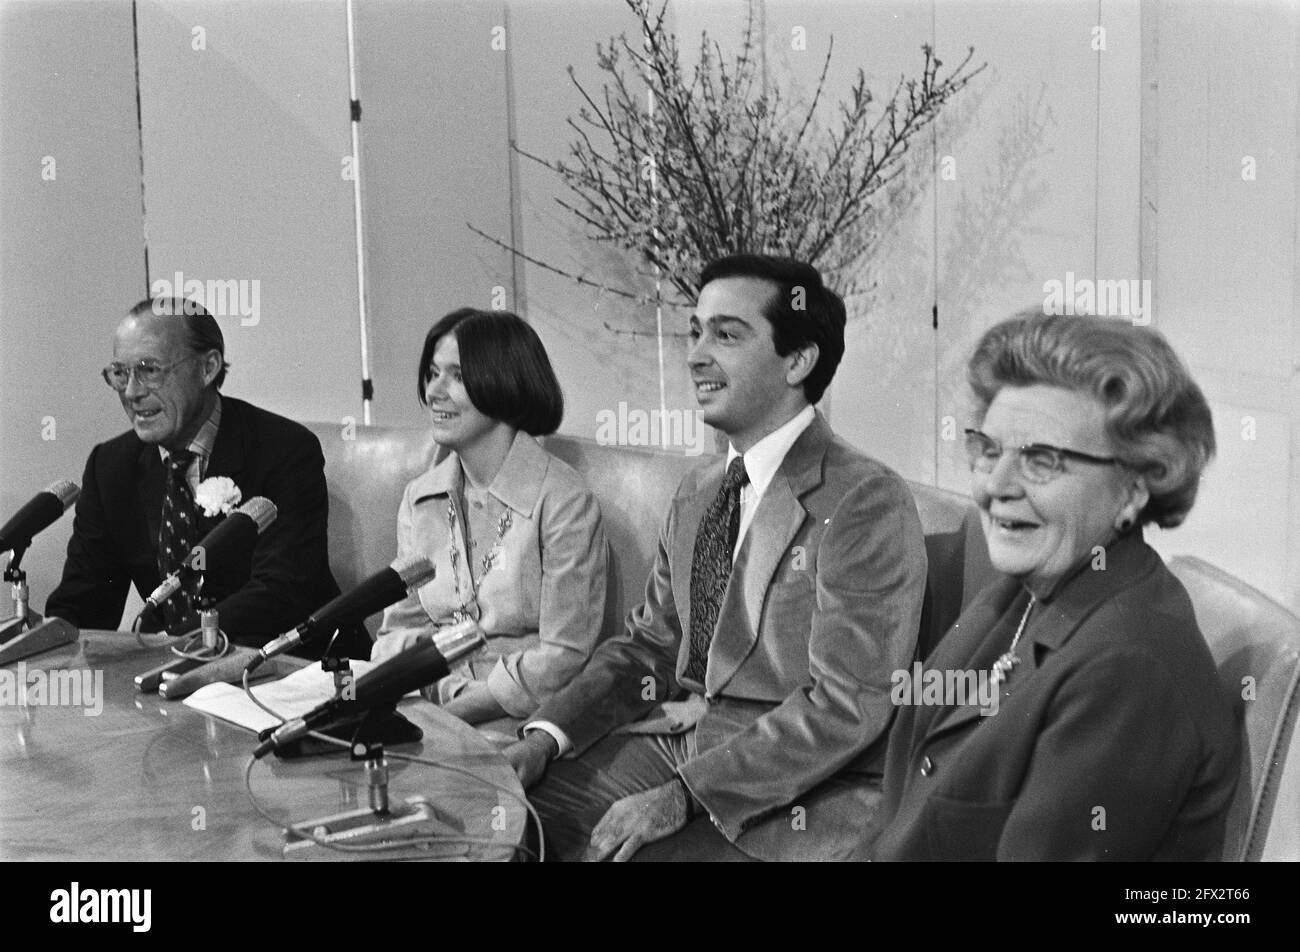 Princess Christina engaged to Jorge Guillermo; at Soestdijk during press conference Prince Bernhard, Princess Christina, Jorge Guillermo and HM, February 14, 1975, queens, press conferences, engagements, The Netherlands, 20th century press agency photo, news to remember, documentary, historic photography 1945-1990, visual stories, human history of the Twentieth Century, capturing moments in time Stock Photo